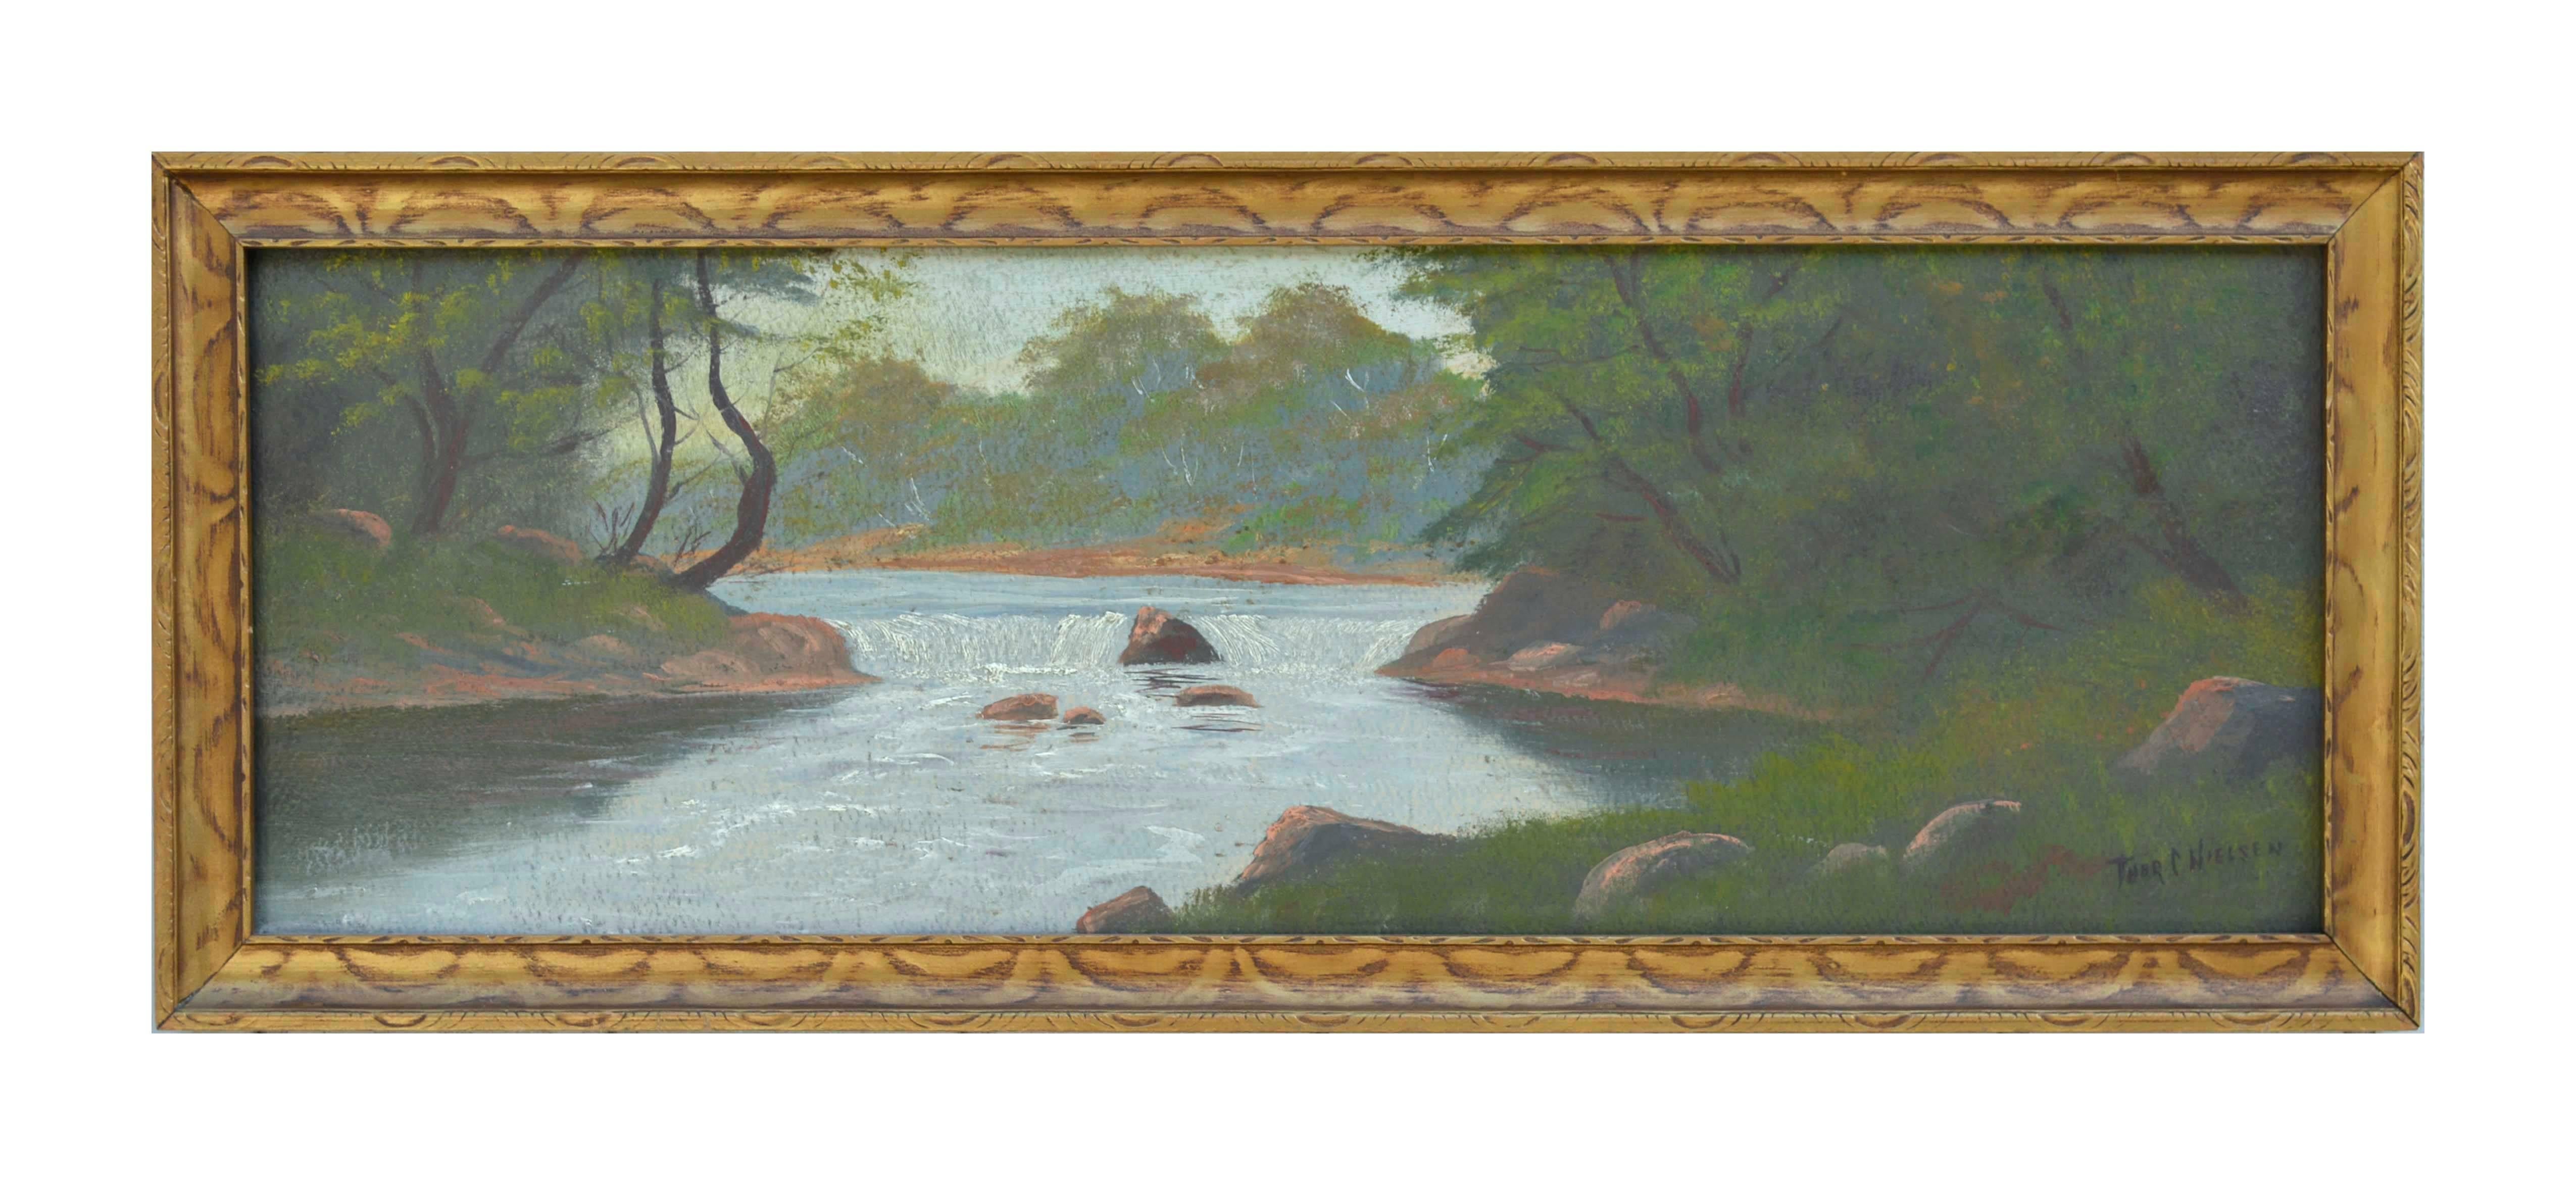 Thor Christian Nielsen Landscape Painting - Early 20th Century California Stream